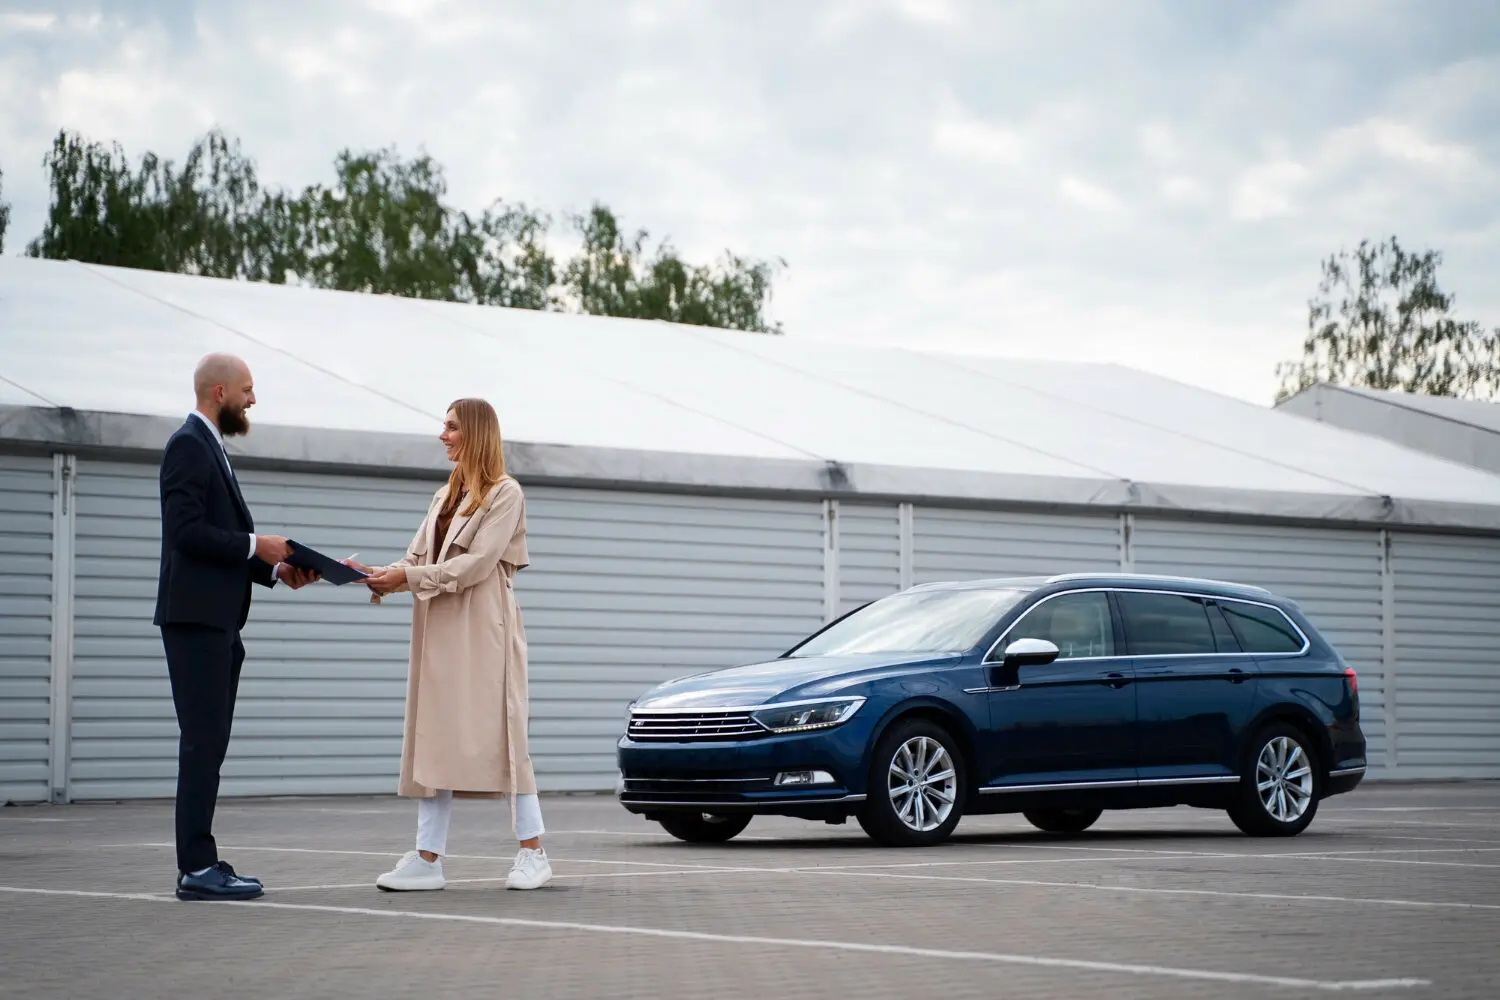 Man and woman closing a deal in car sales